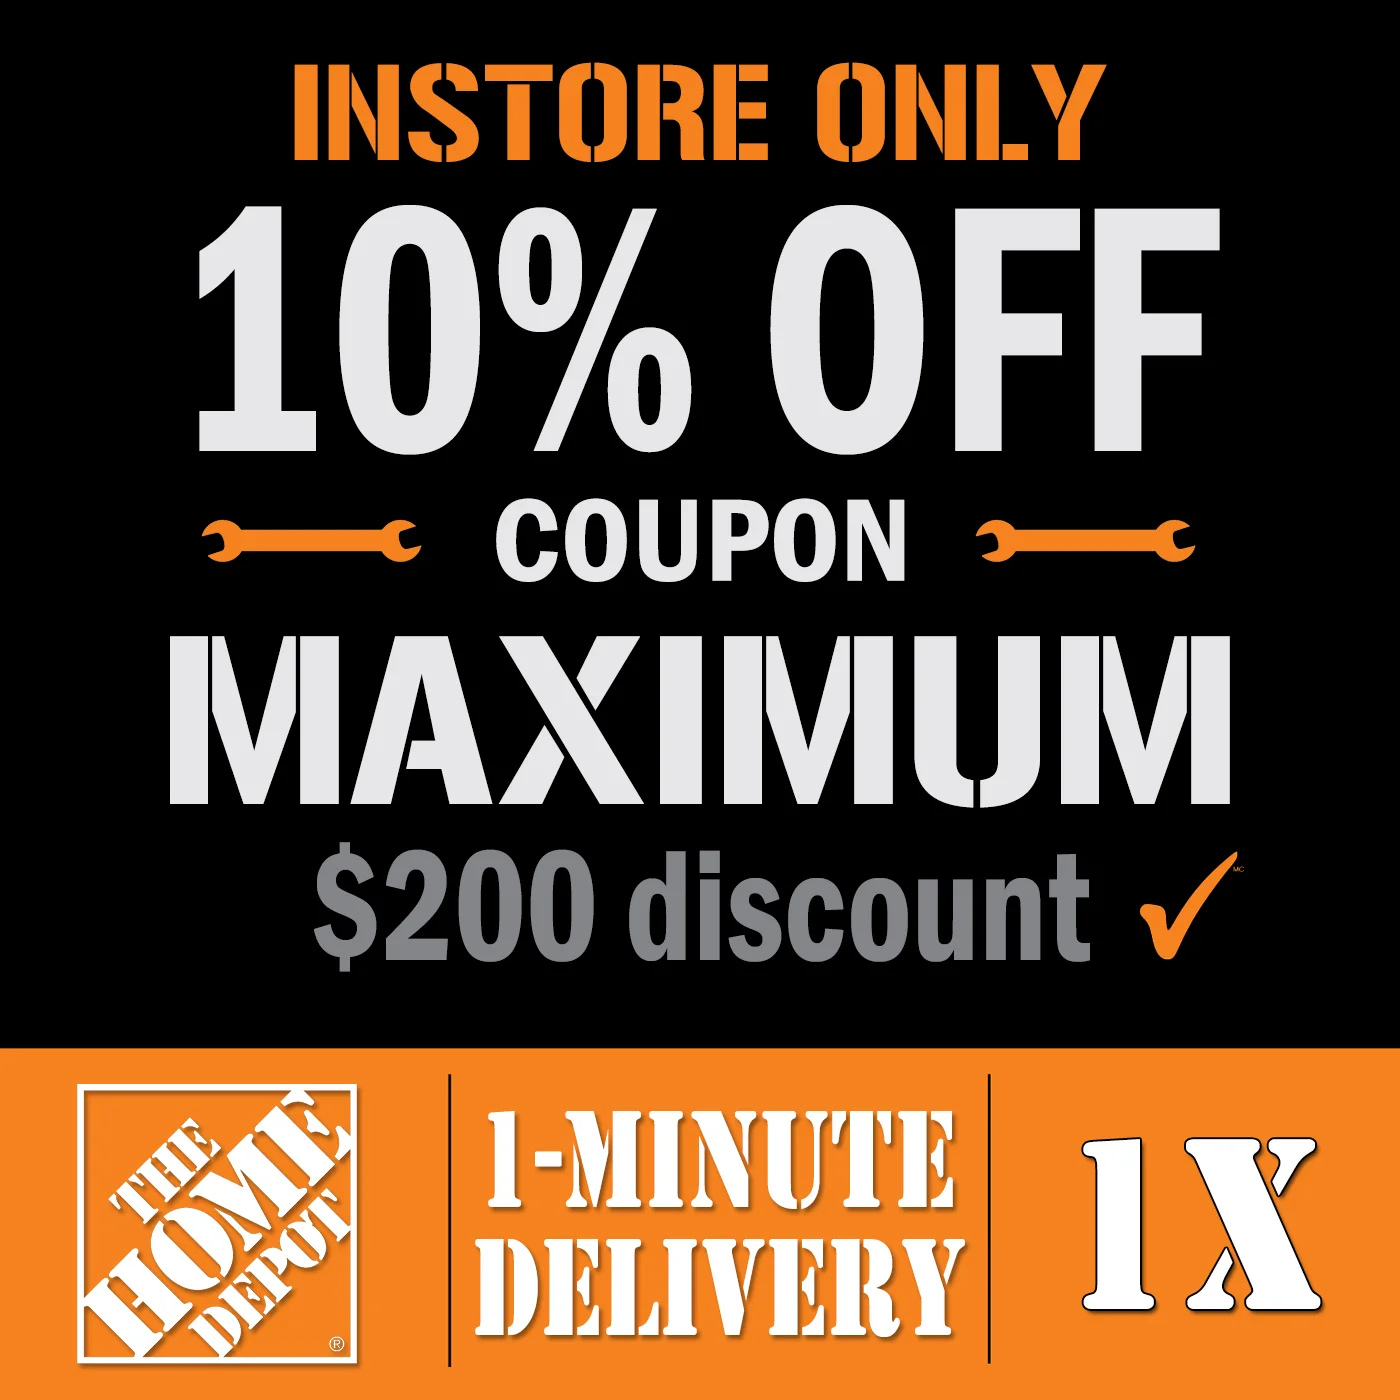 Does Home Depot Give a 10% Discount?